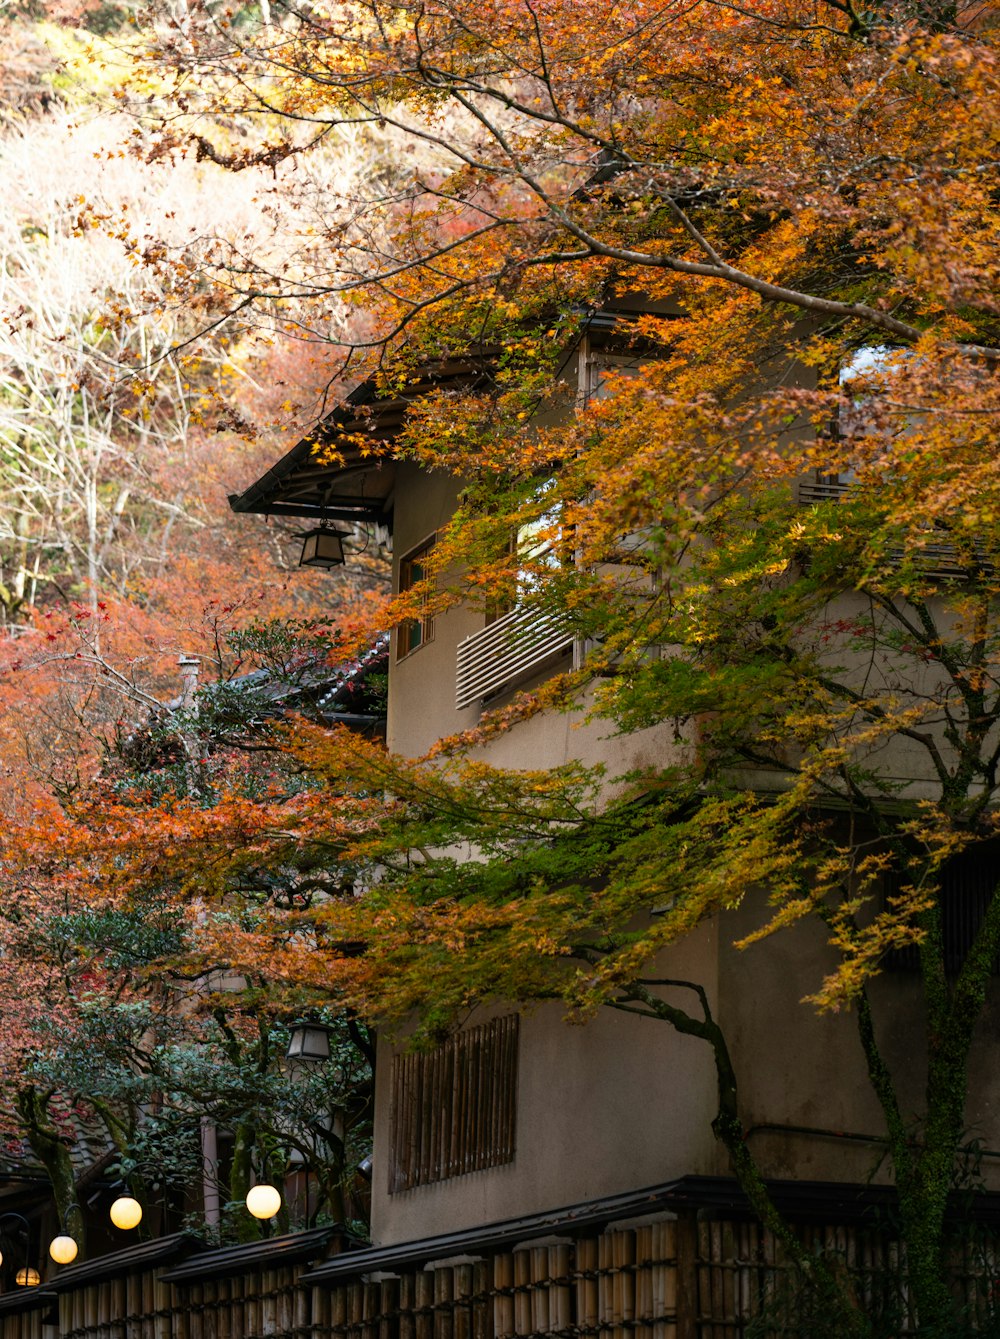 a tree with orange and yellow leaves in front of a building